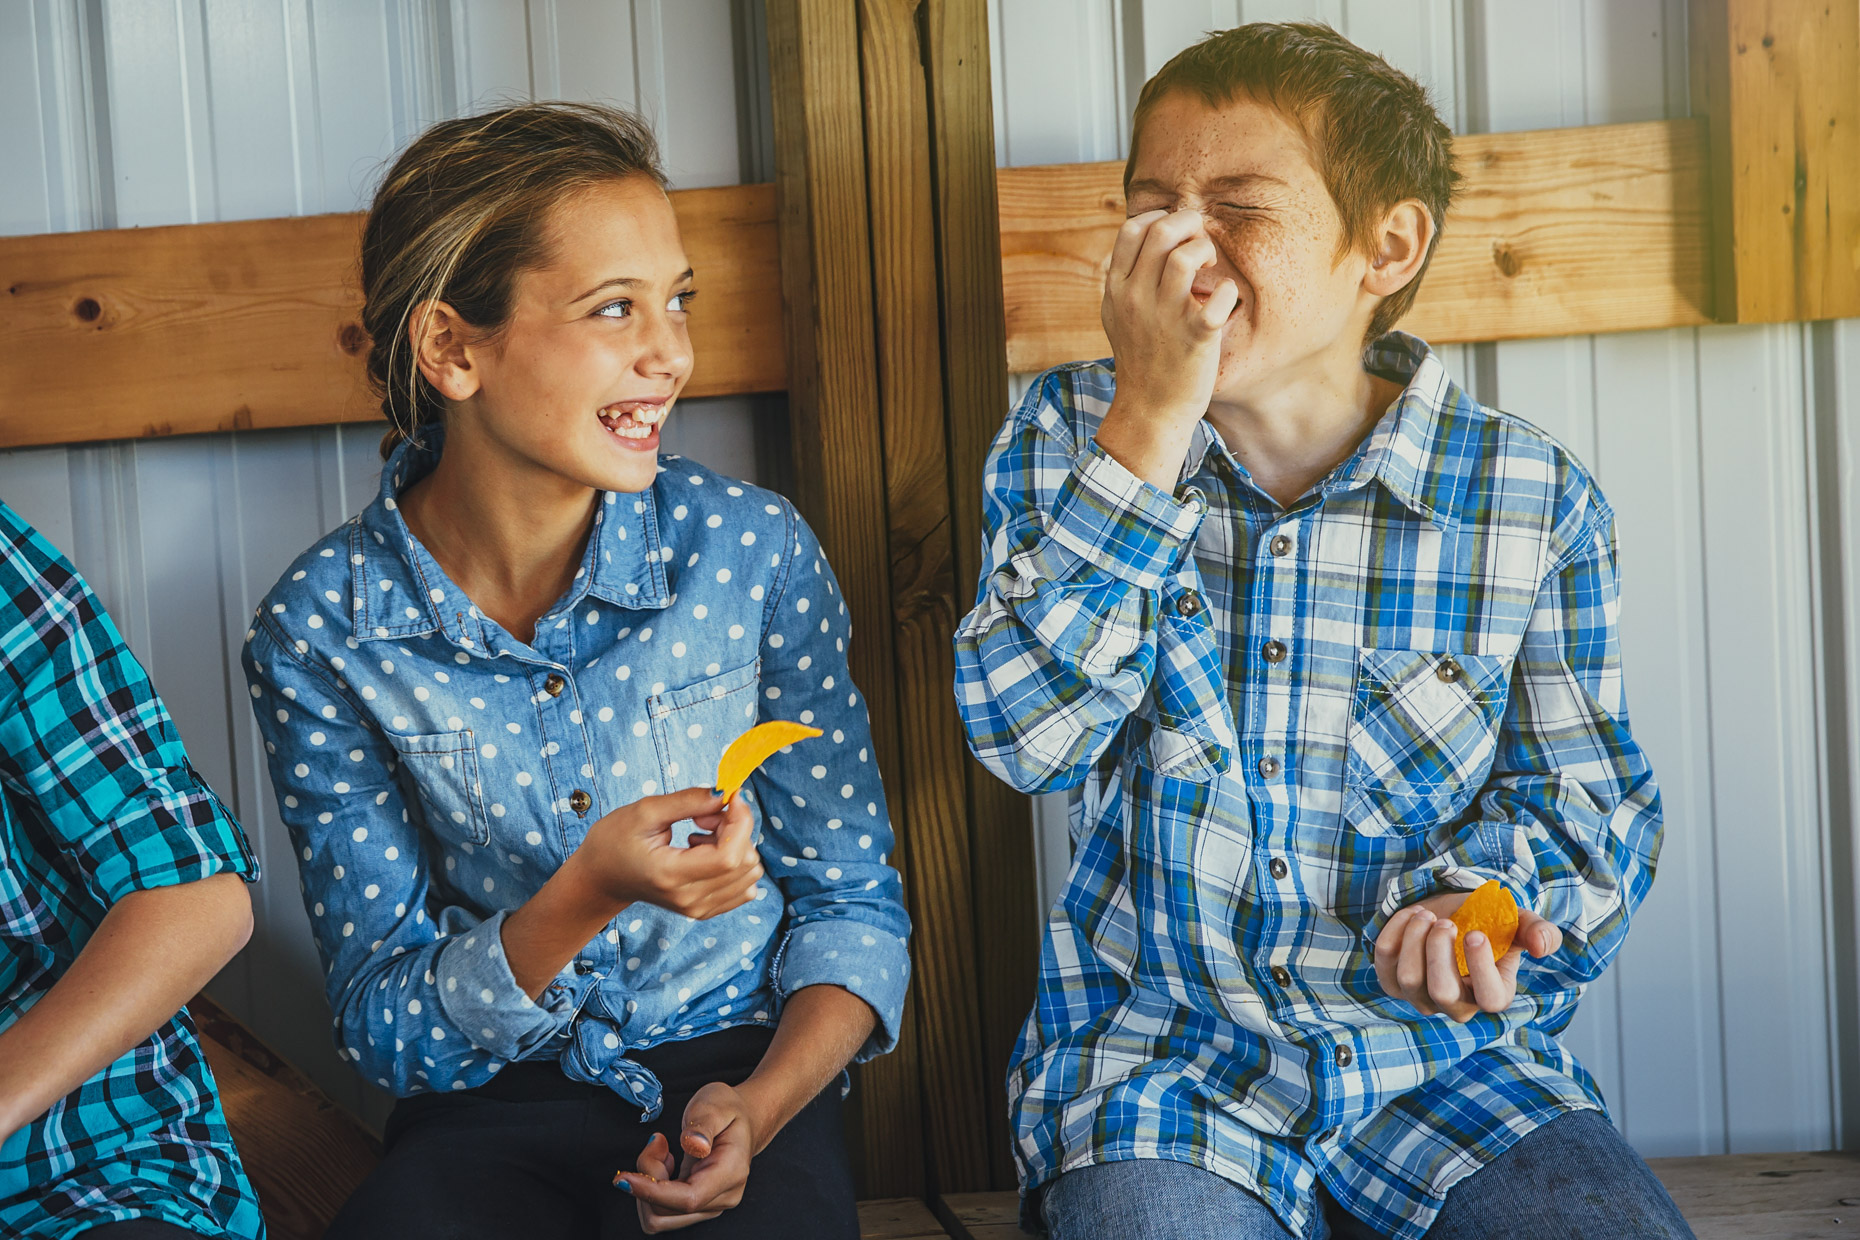 Tween boy and girl eating chips and laughing